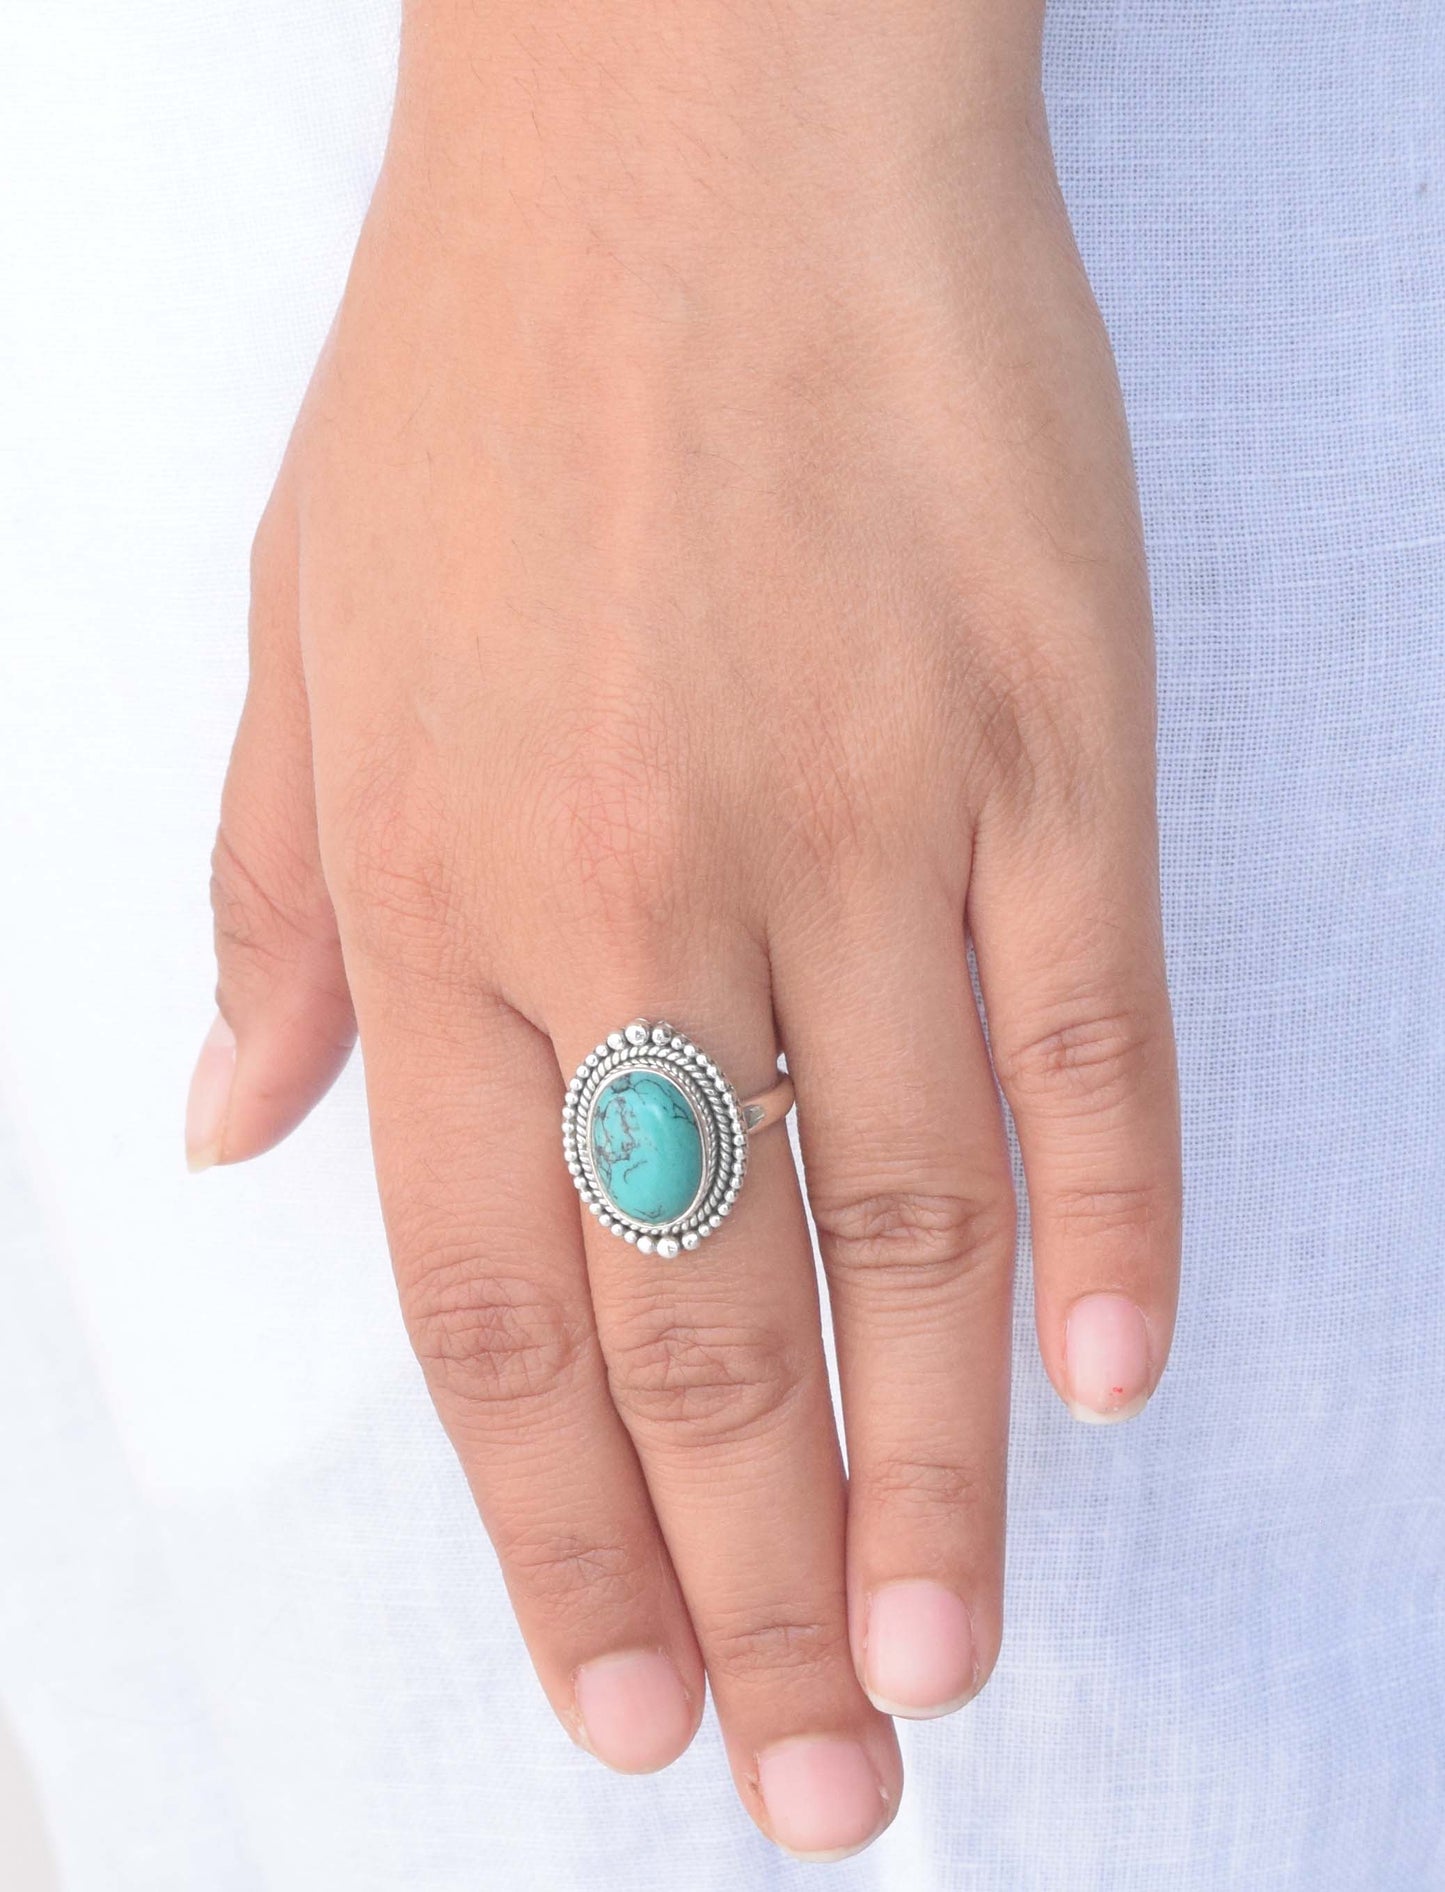 Blue Turquoise 925 Sterling Silver Gemstone Ring